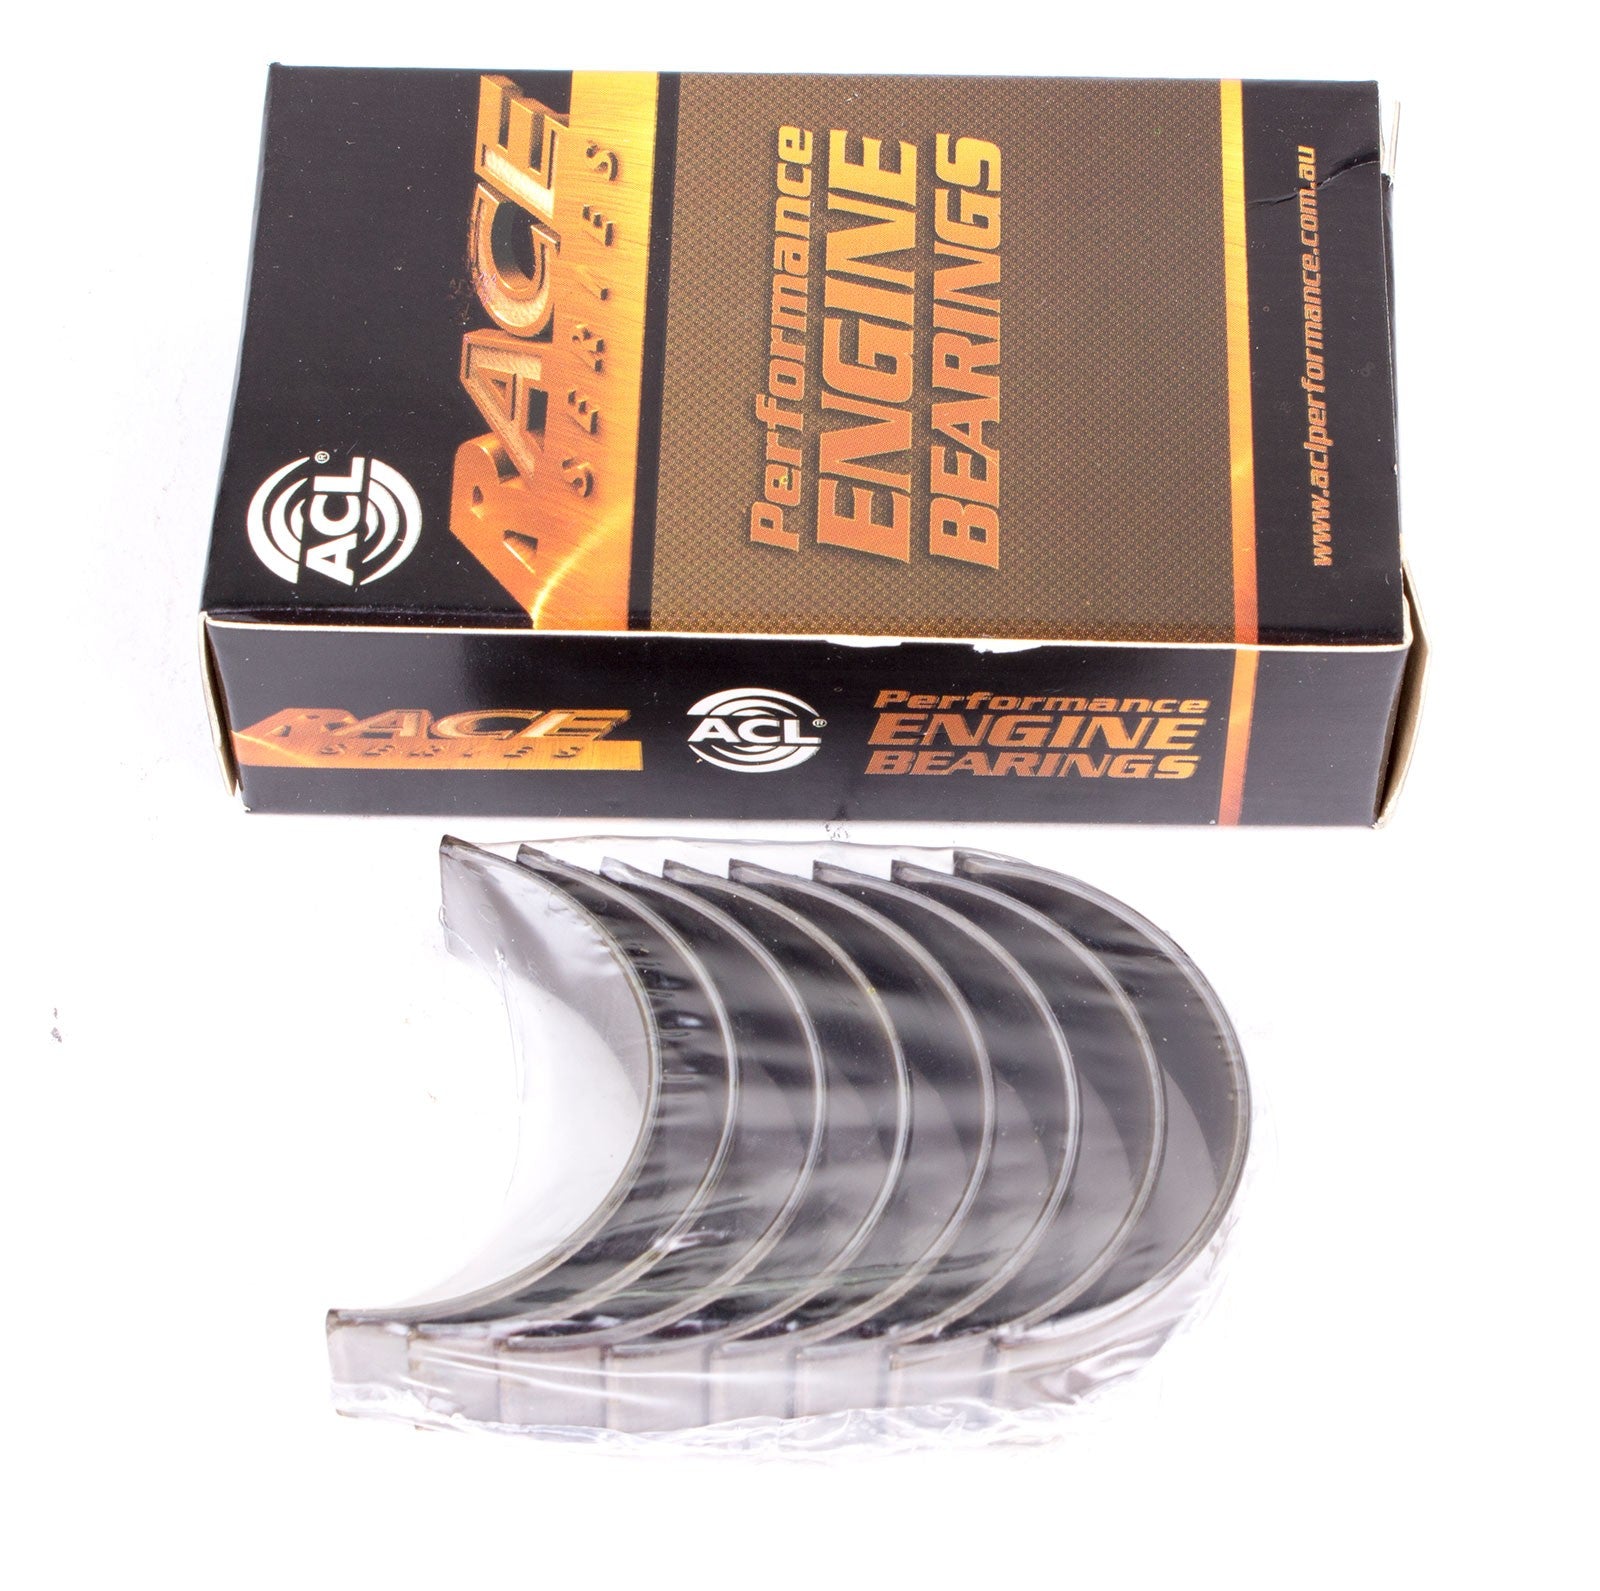 ACL 5M1117H-10 Main bearing set (ACL Race Series) Photo-0 